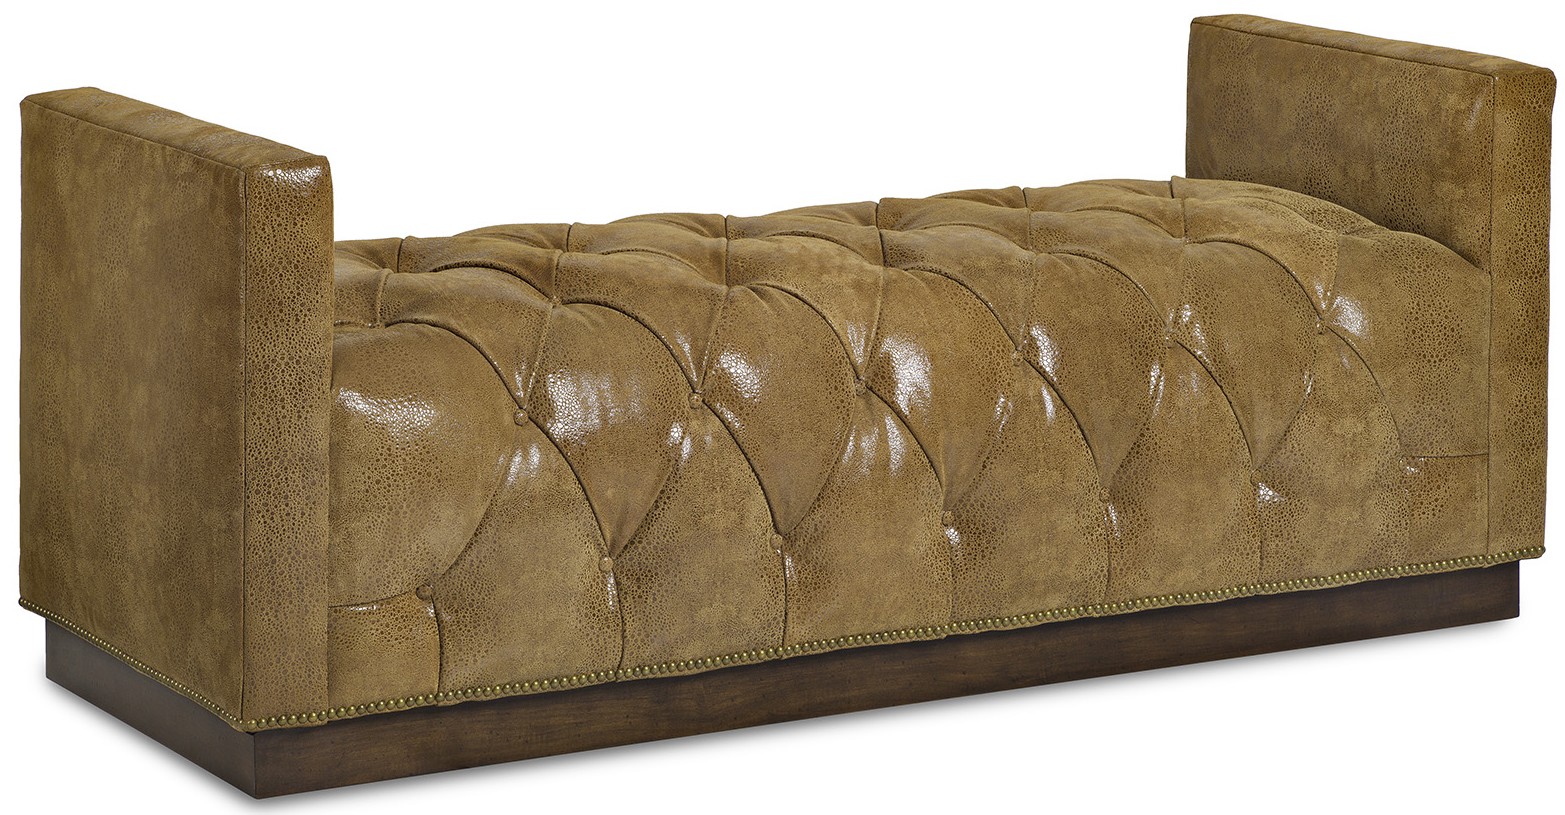 SETTEES, CHAISE, BENCHES Tufted leather bench